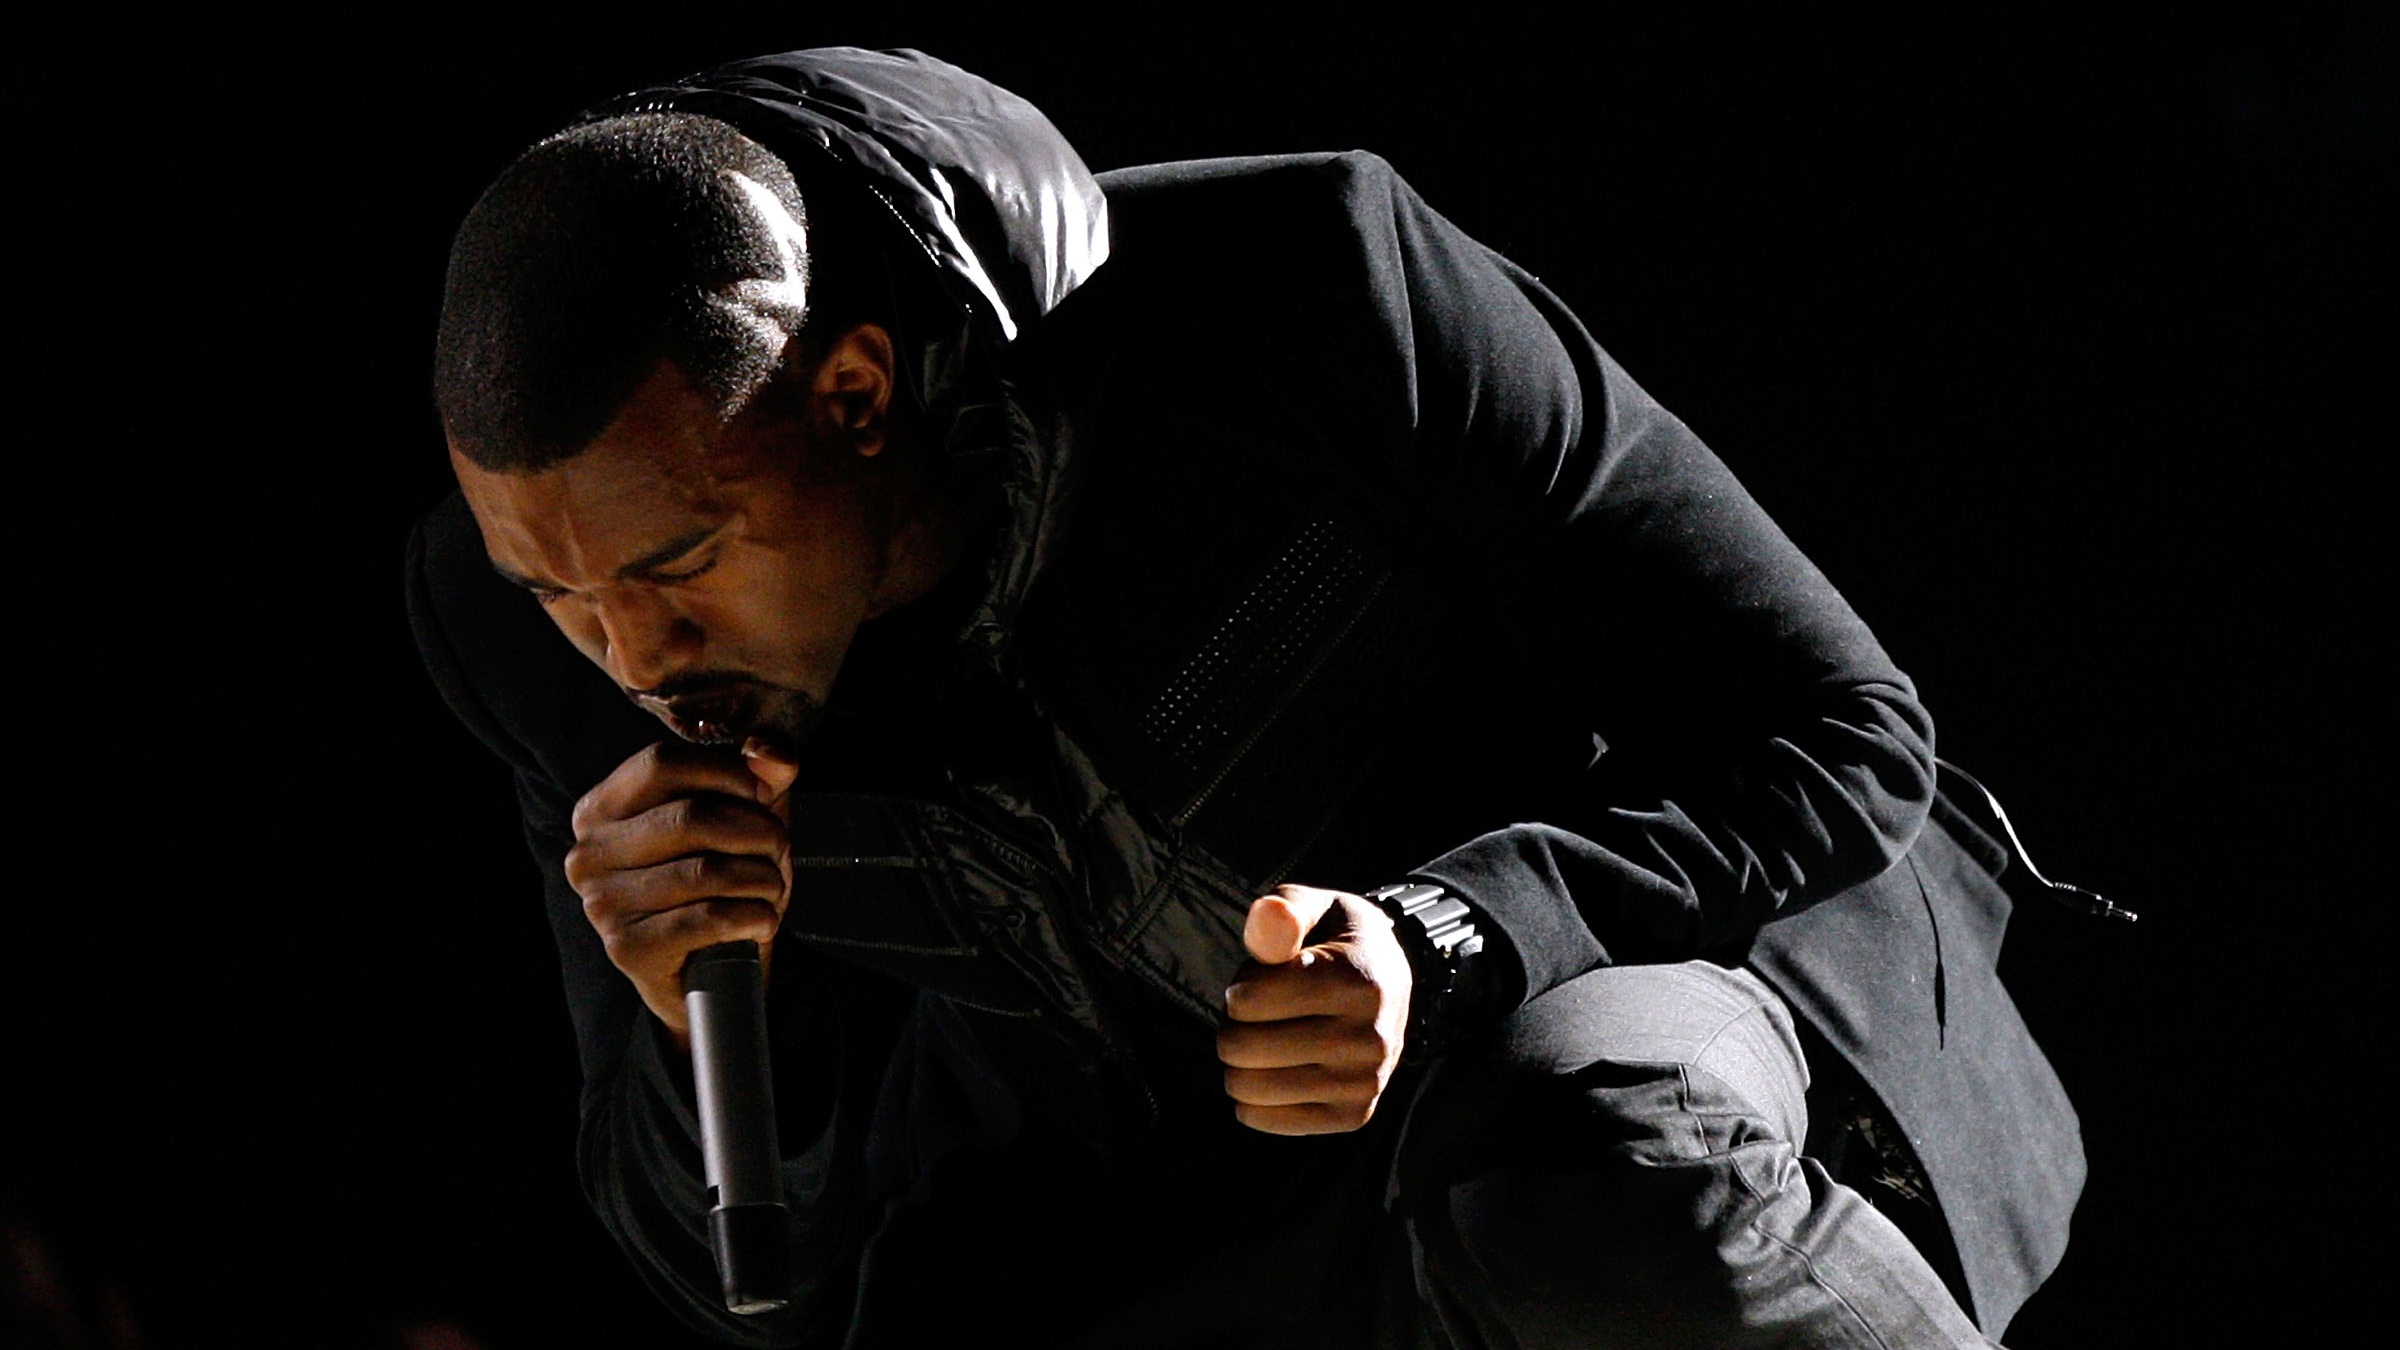 Kayne West performs at the Grammys in 2008